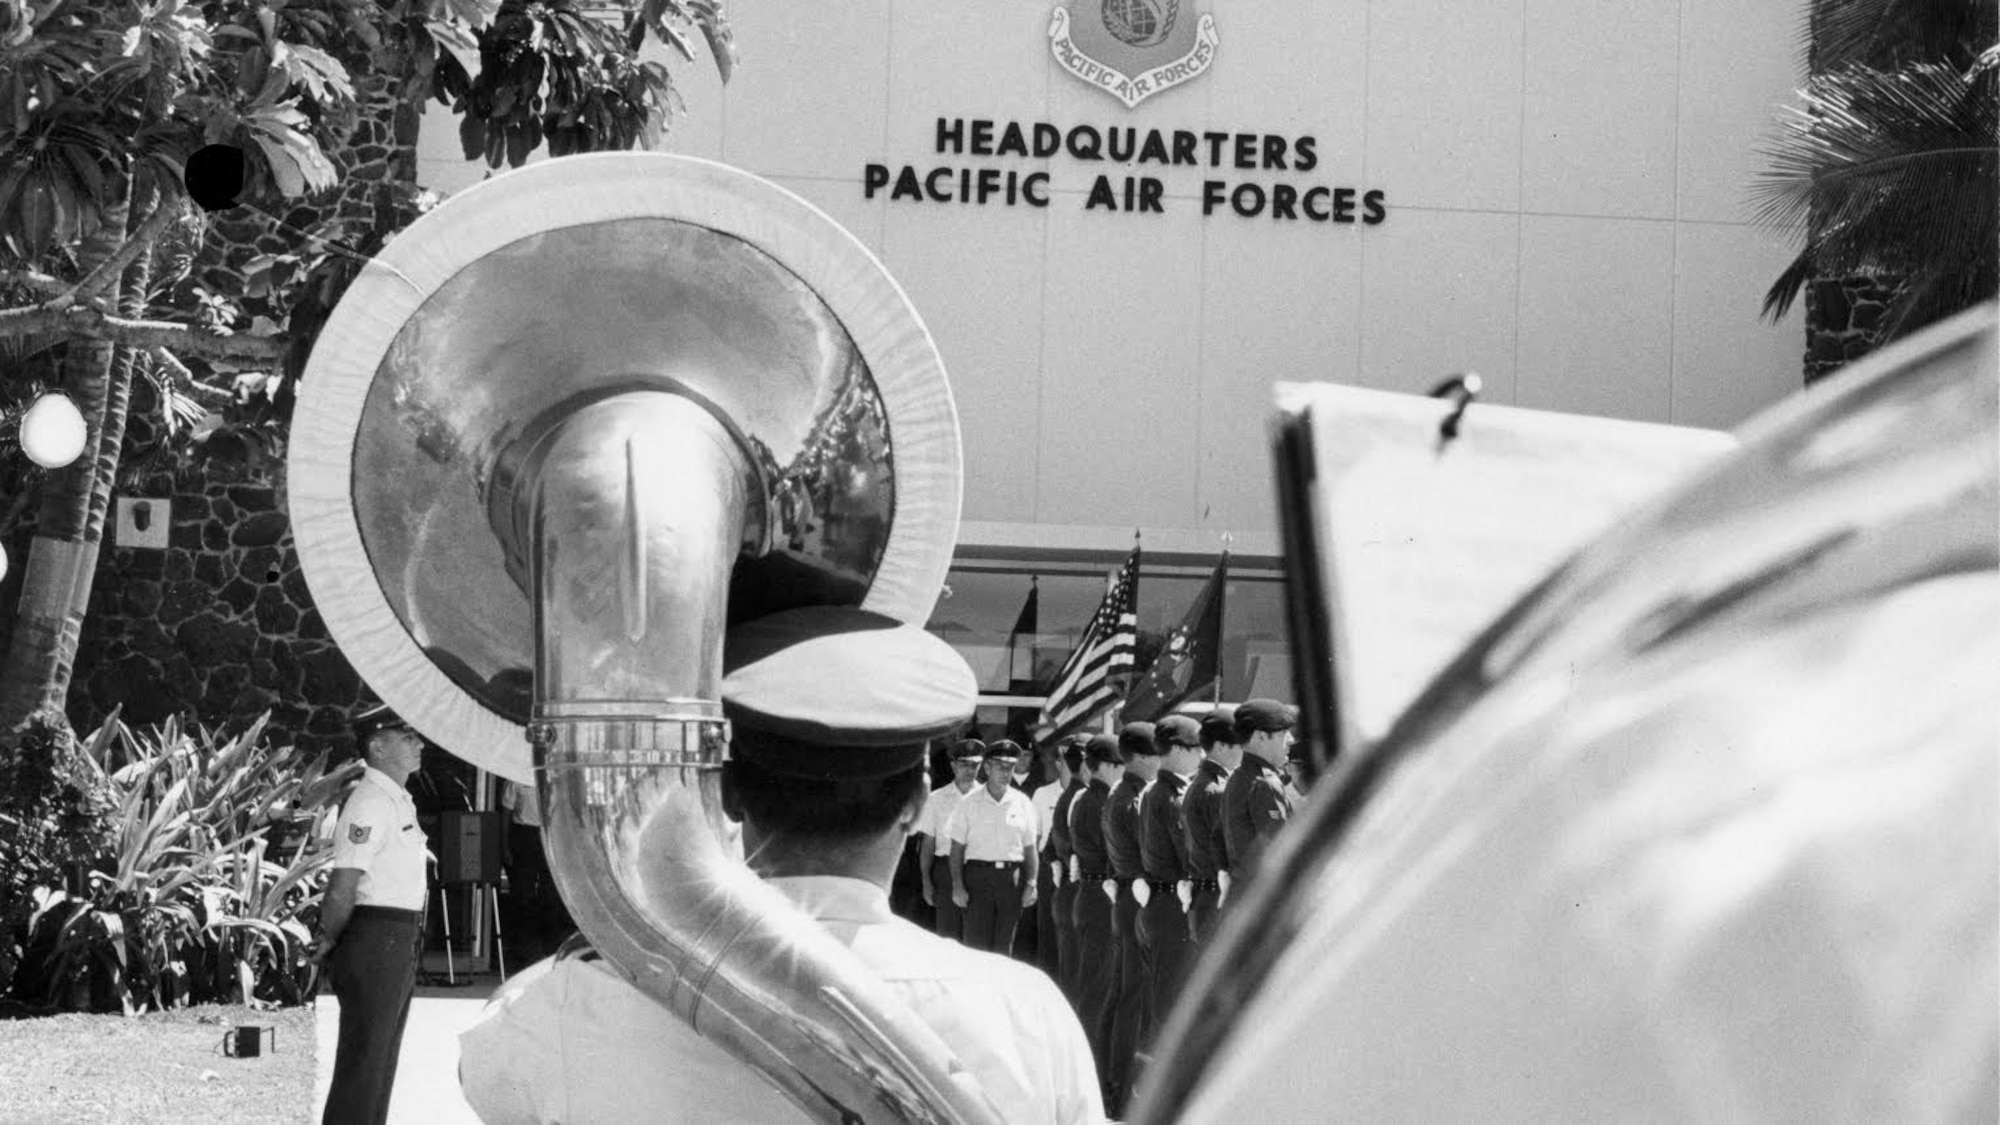 USAF Band of the Pacific